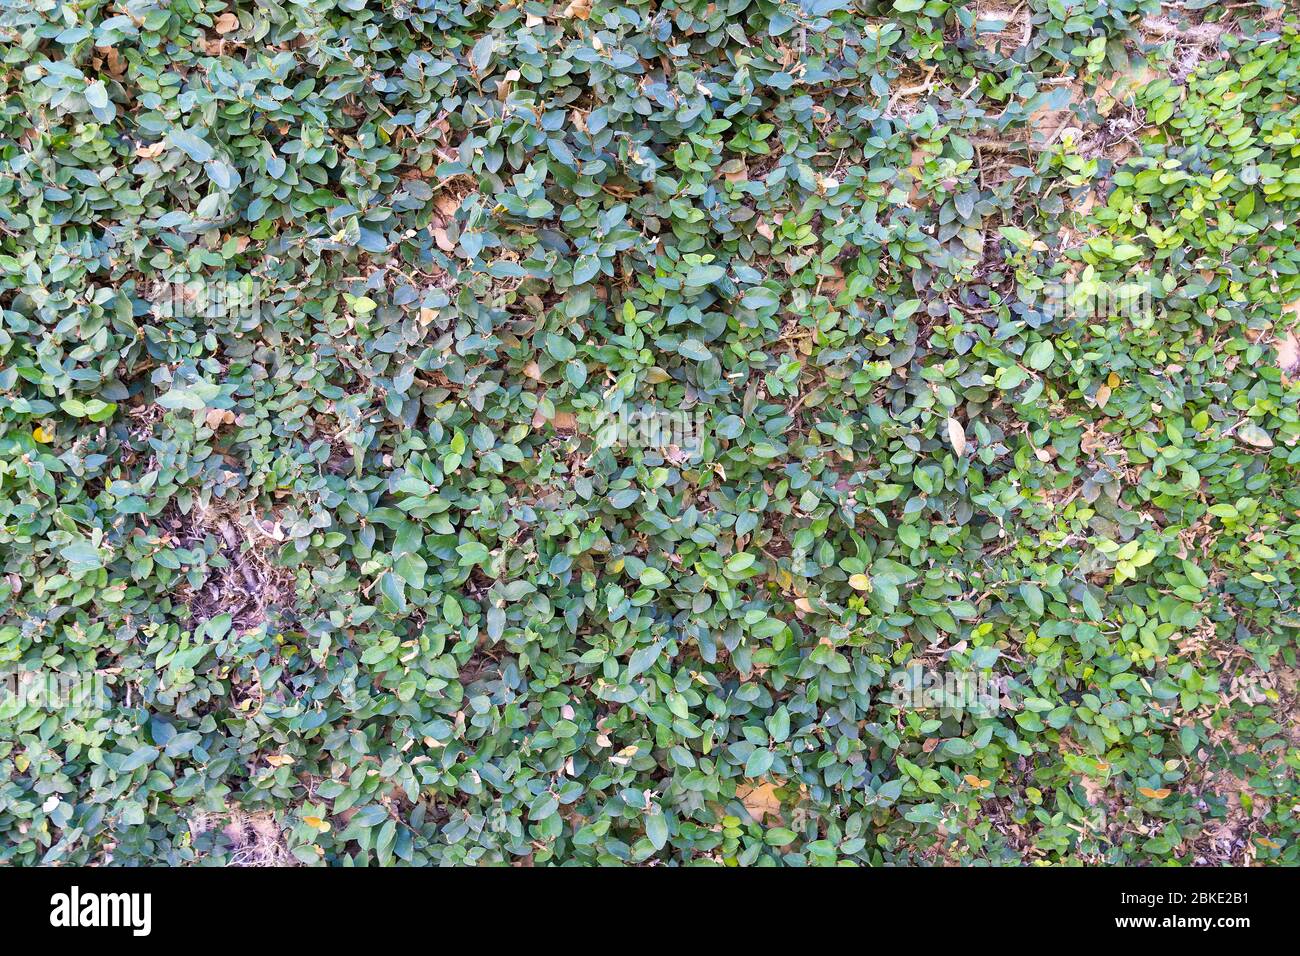 The Green creeper plant on grunge old house wall. Abstract plant wall background. Stock Photo